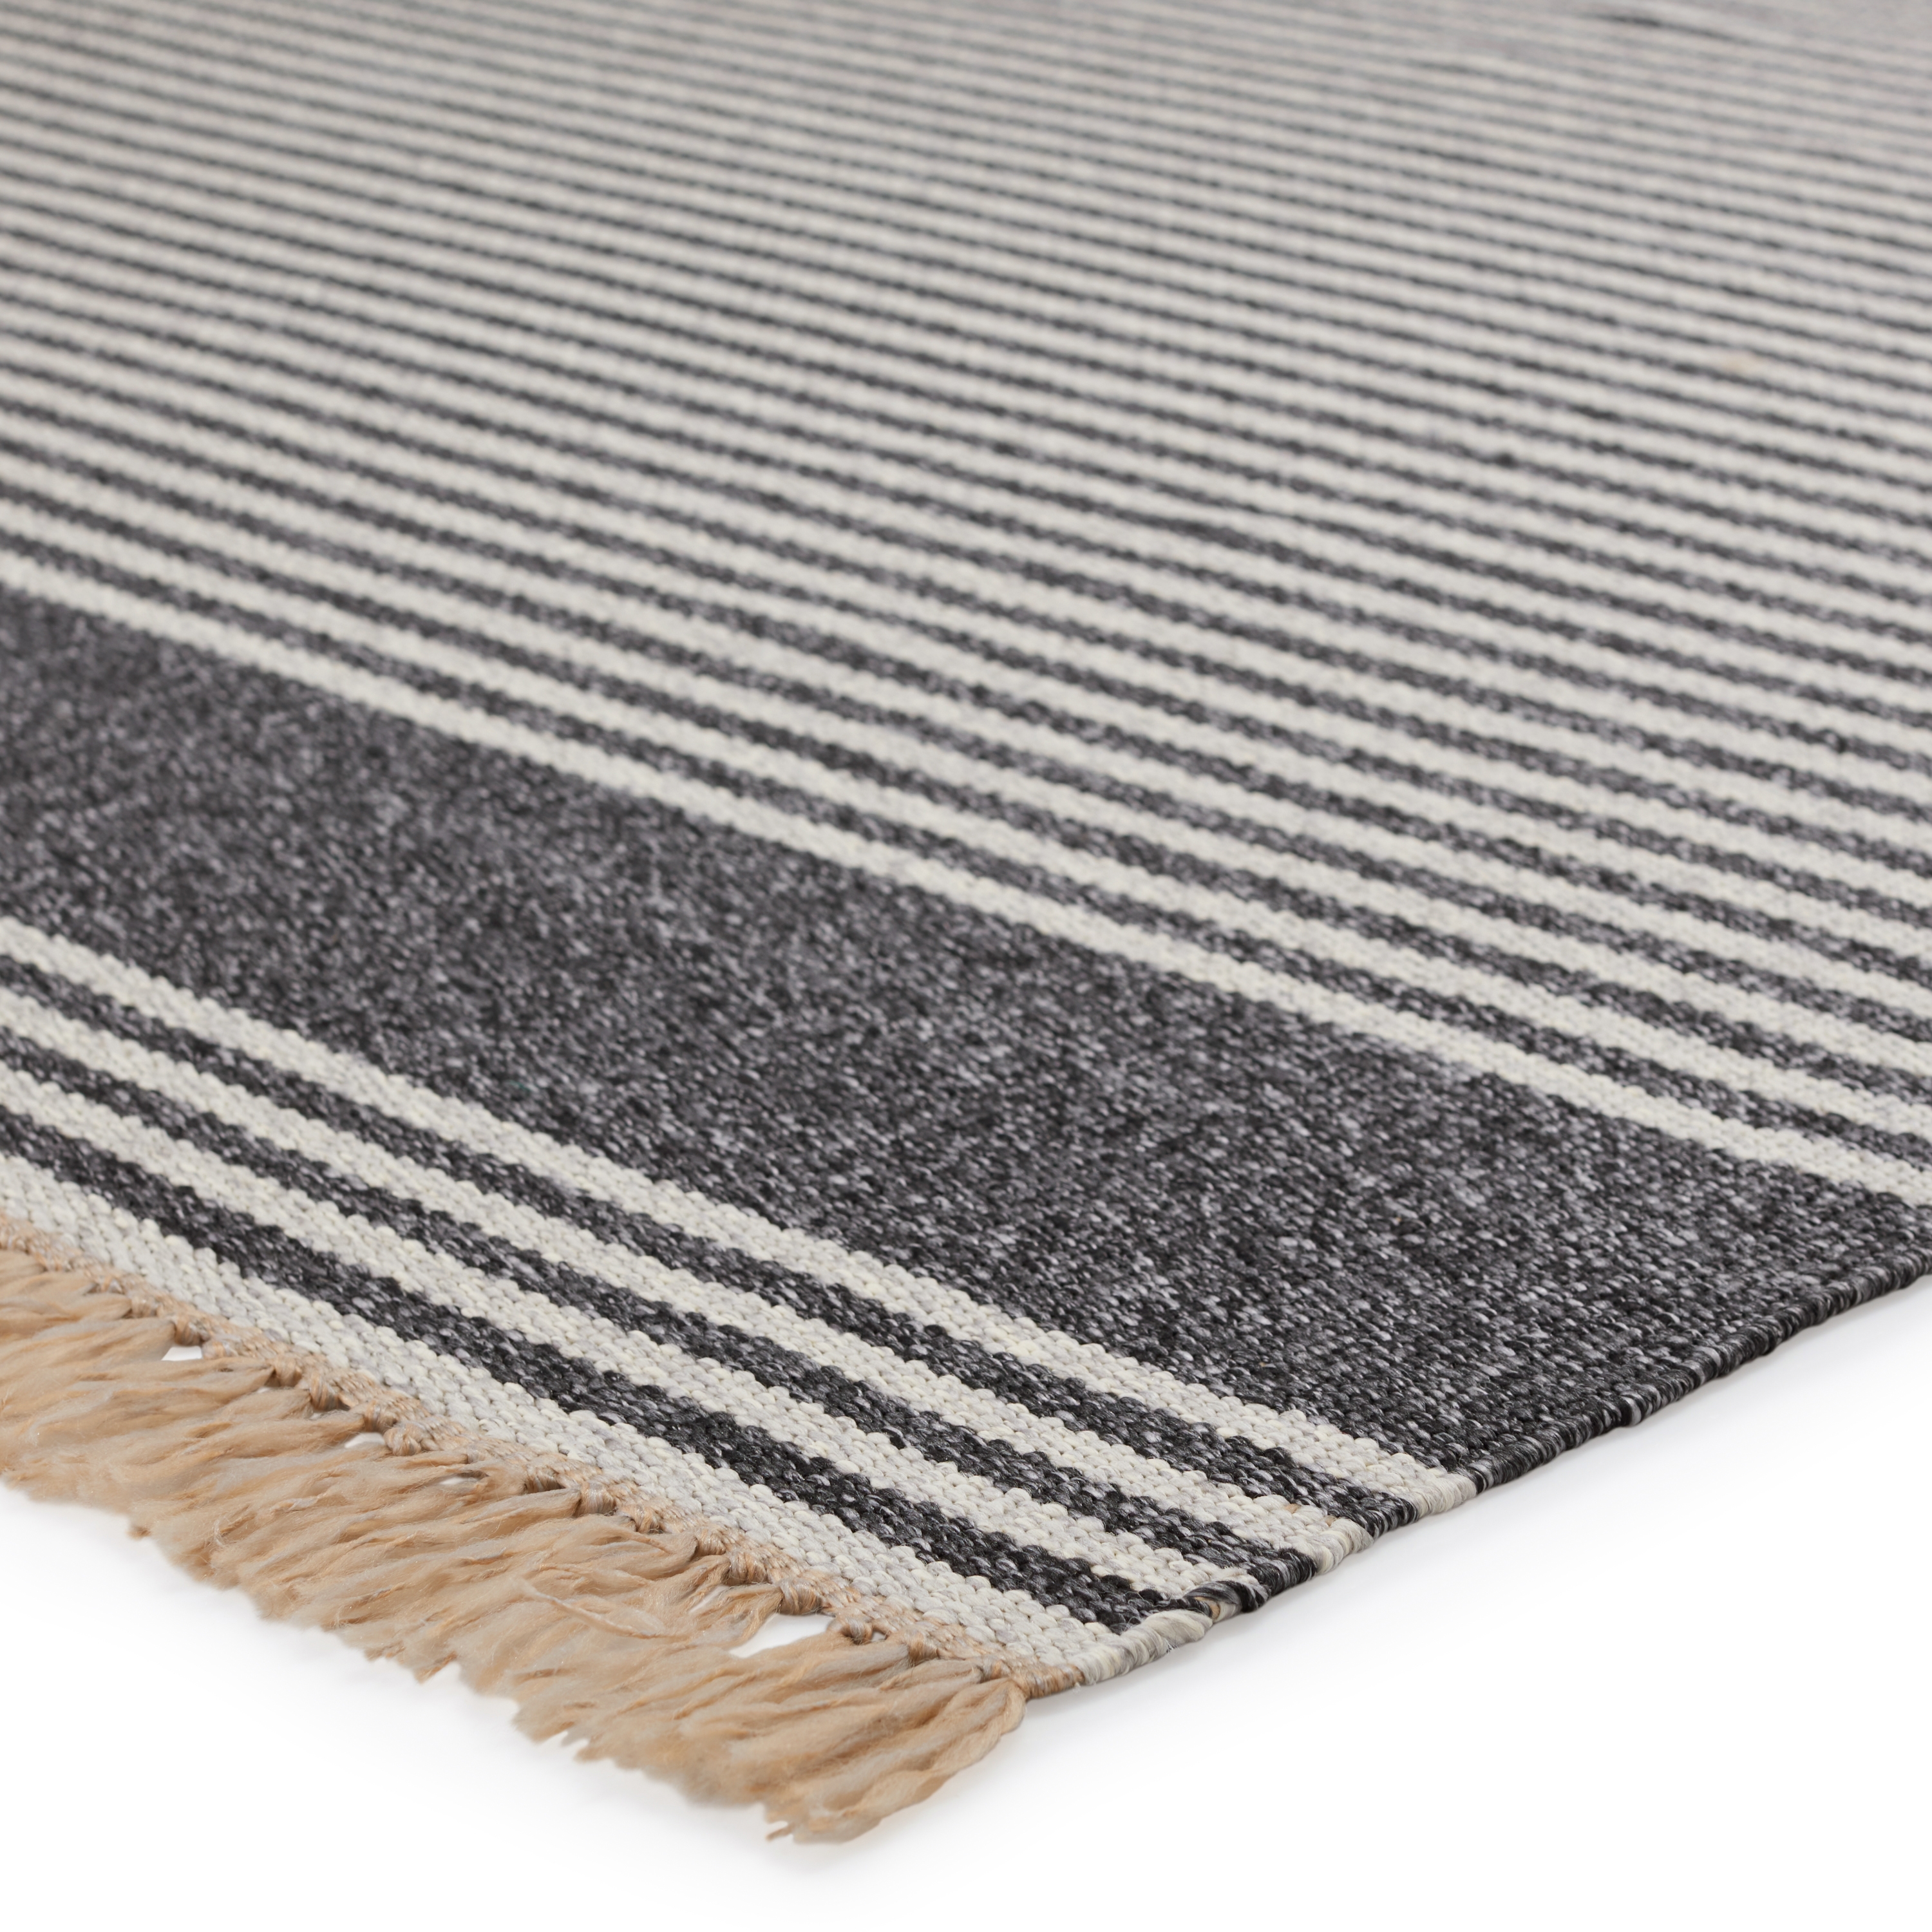 Vibe by Strand Indoor/ Outdoor Striped Dark Gray/ Beige Area Rug (2'X3') - Image 1